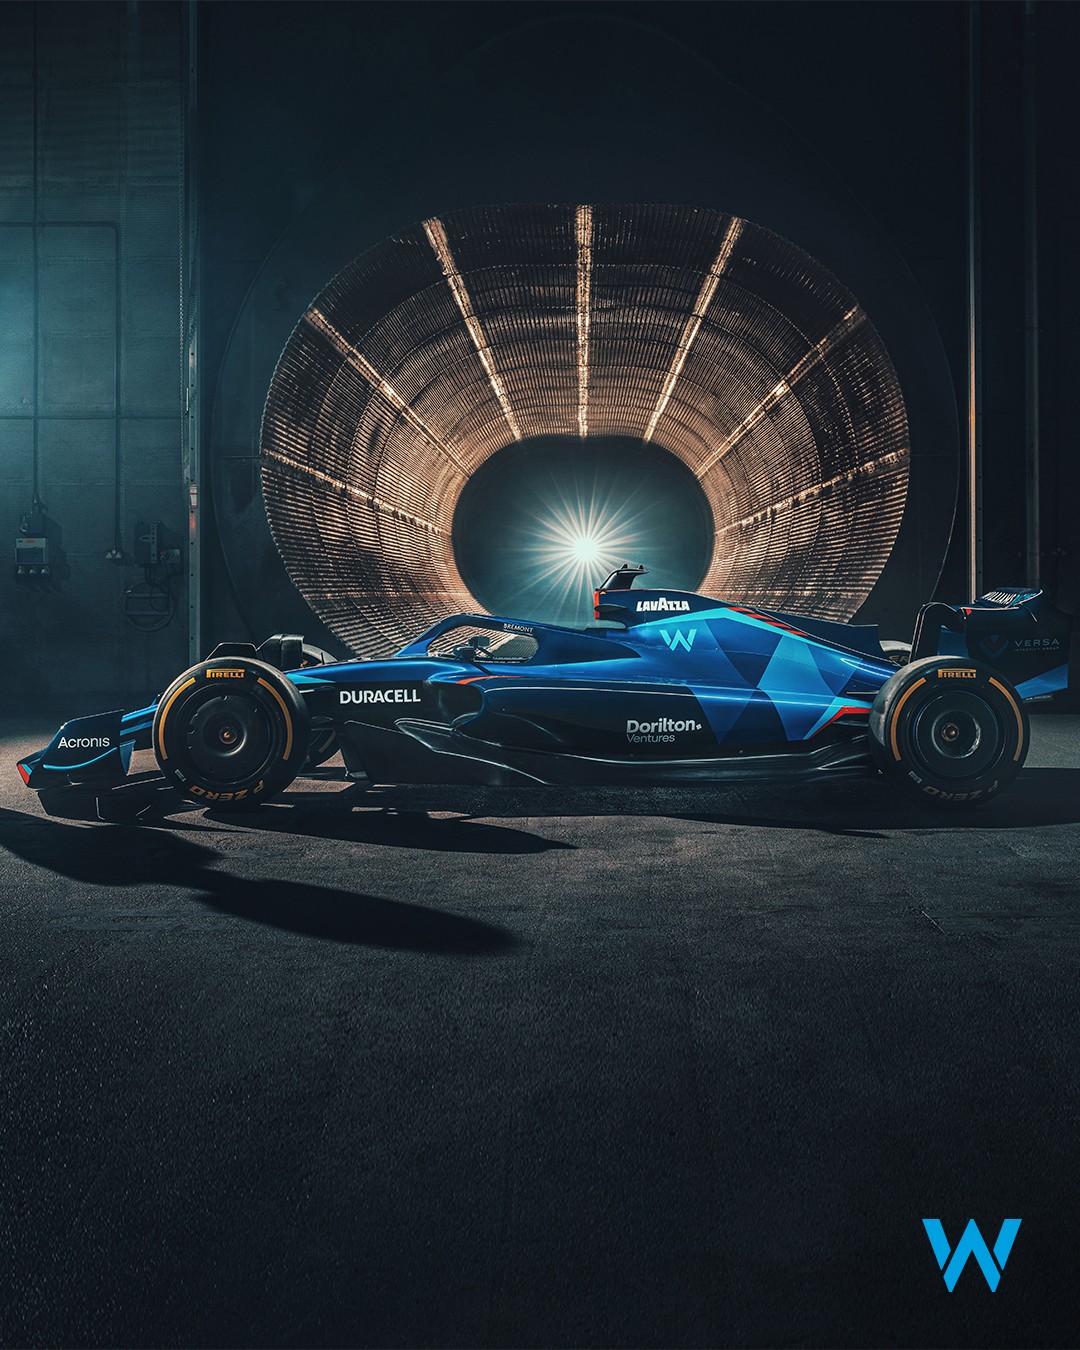 Williams Racing Unveils Brand New 2022 Livery Using Generic F1 Show Car